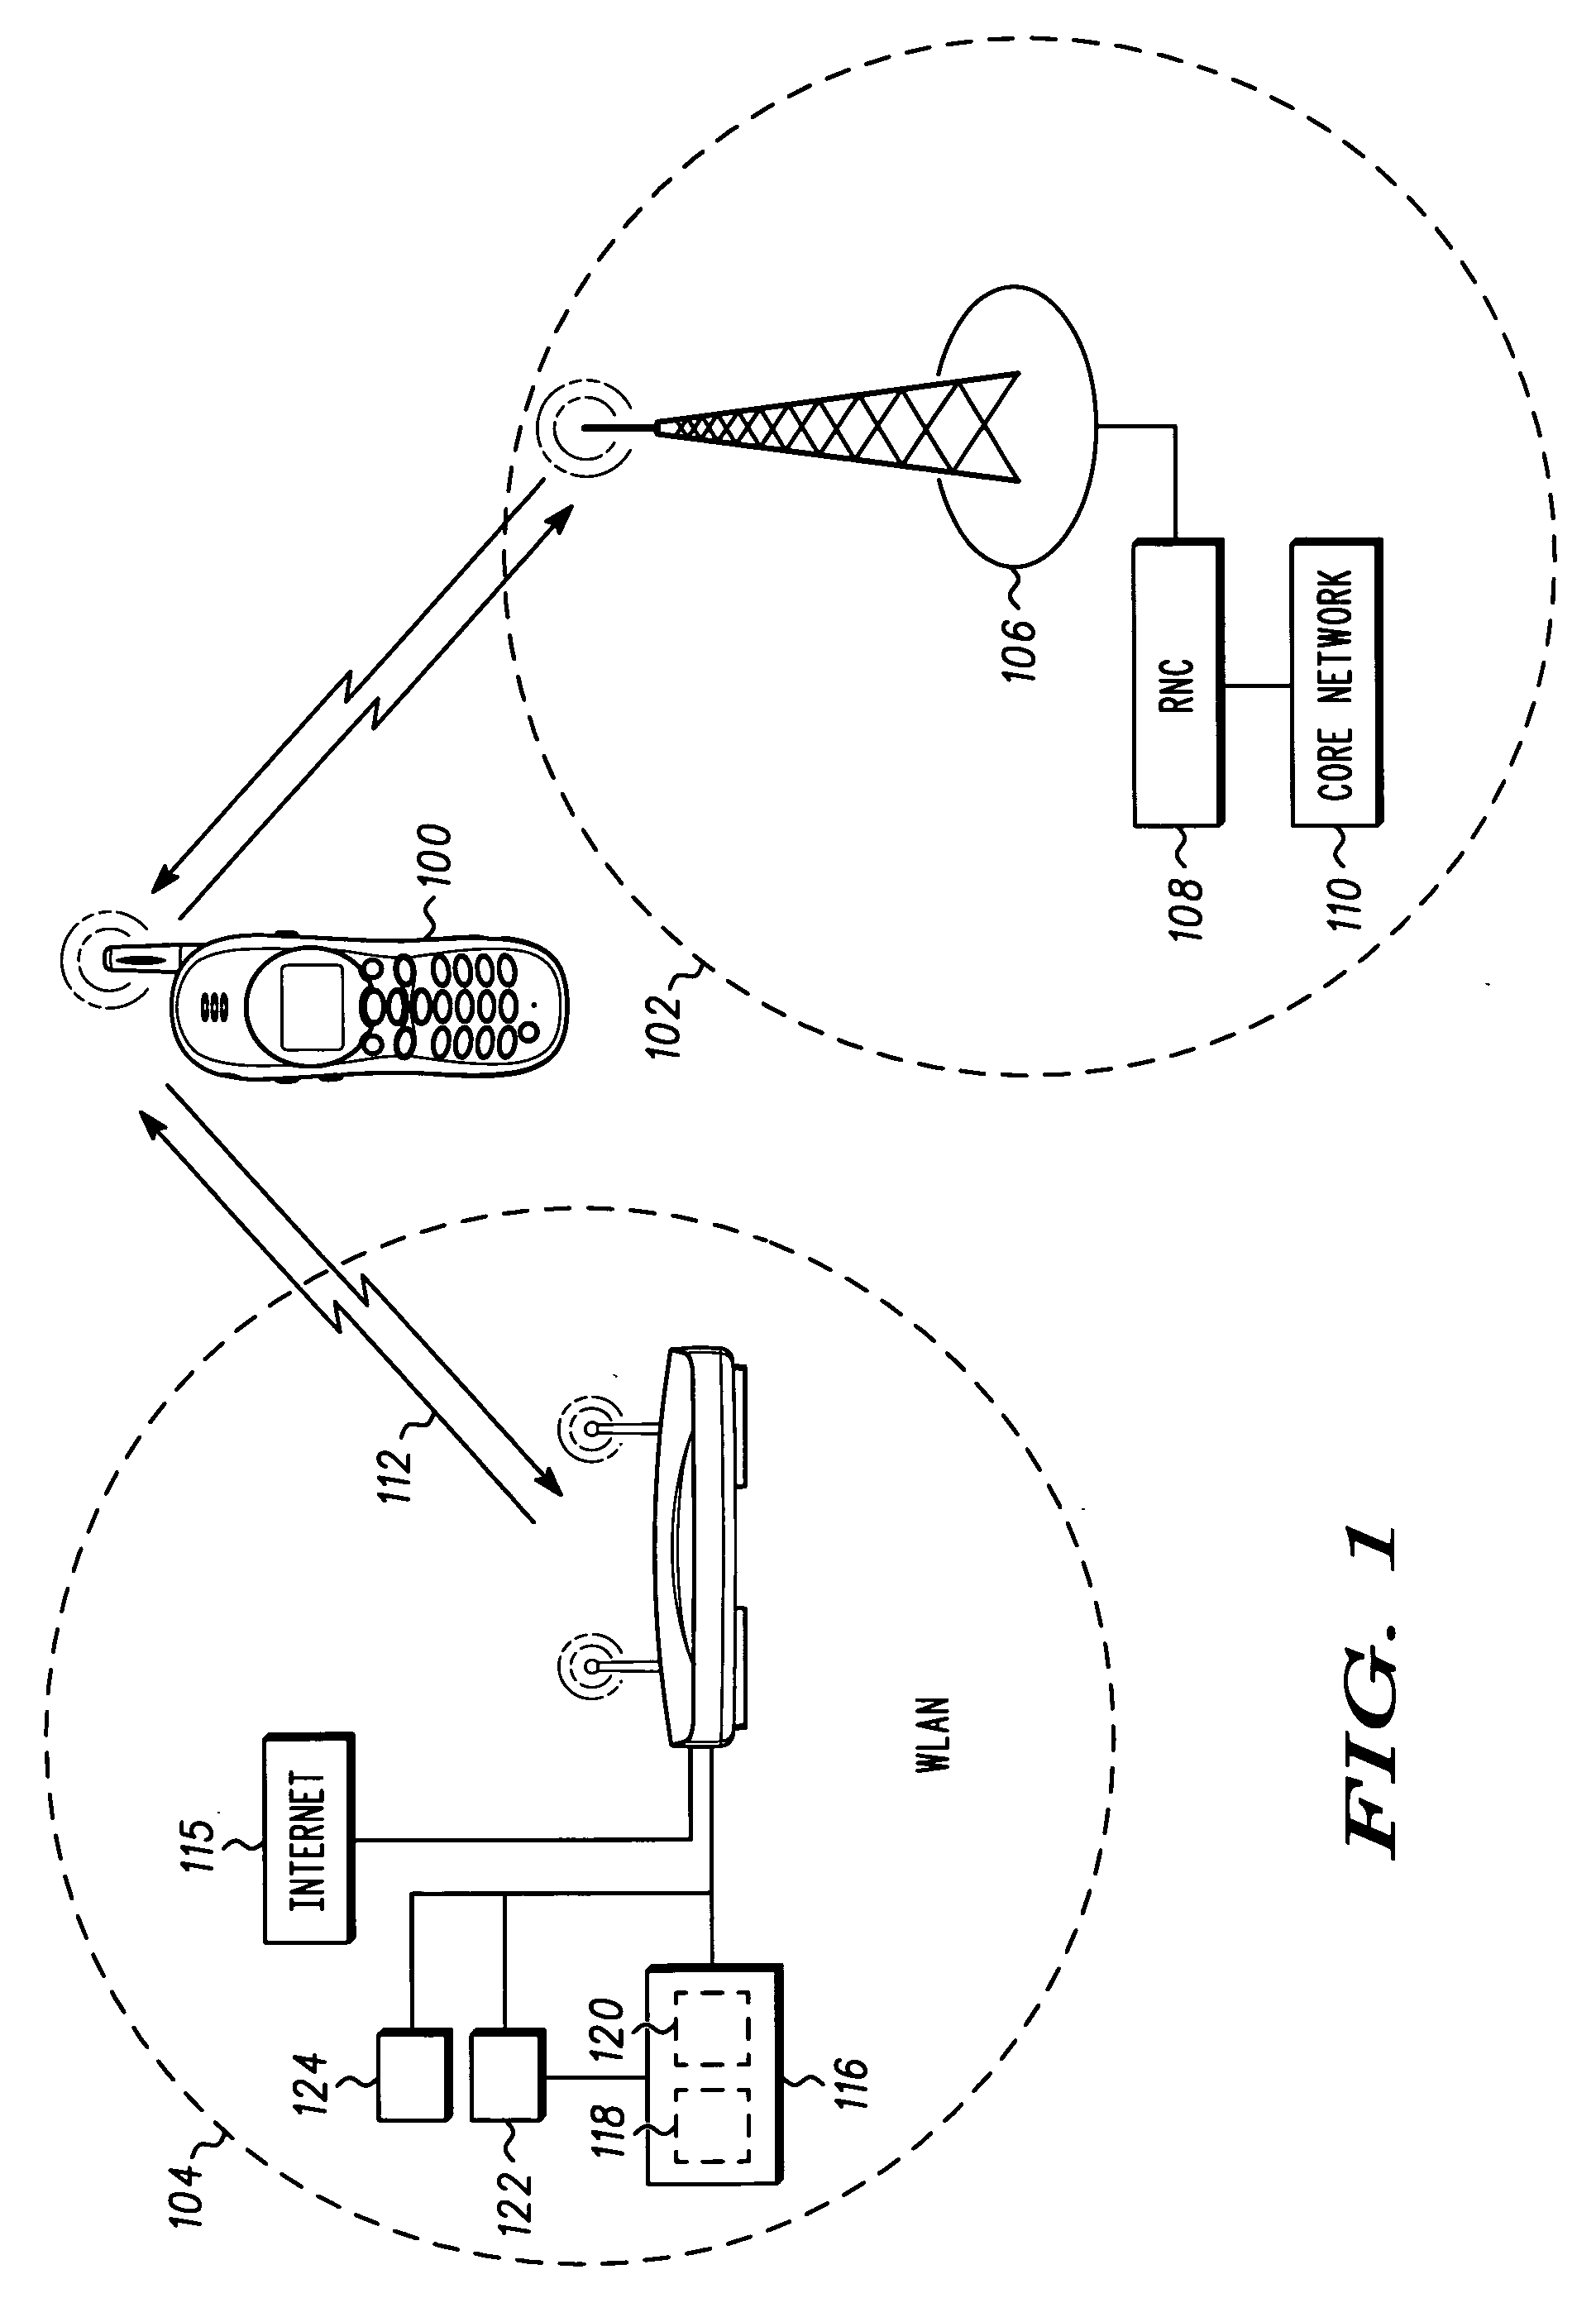 Method and apparatus for associating with a communication system